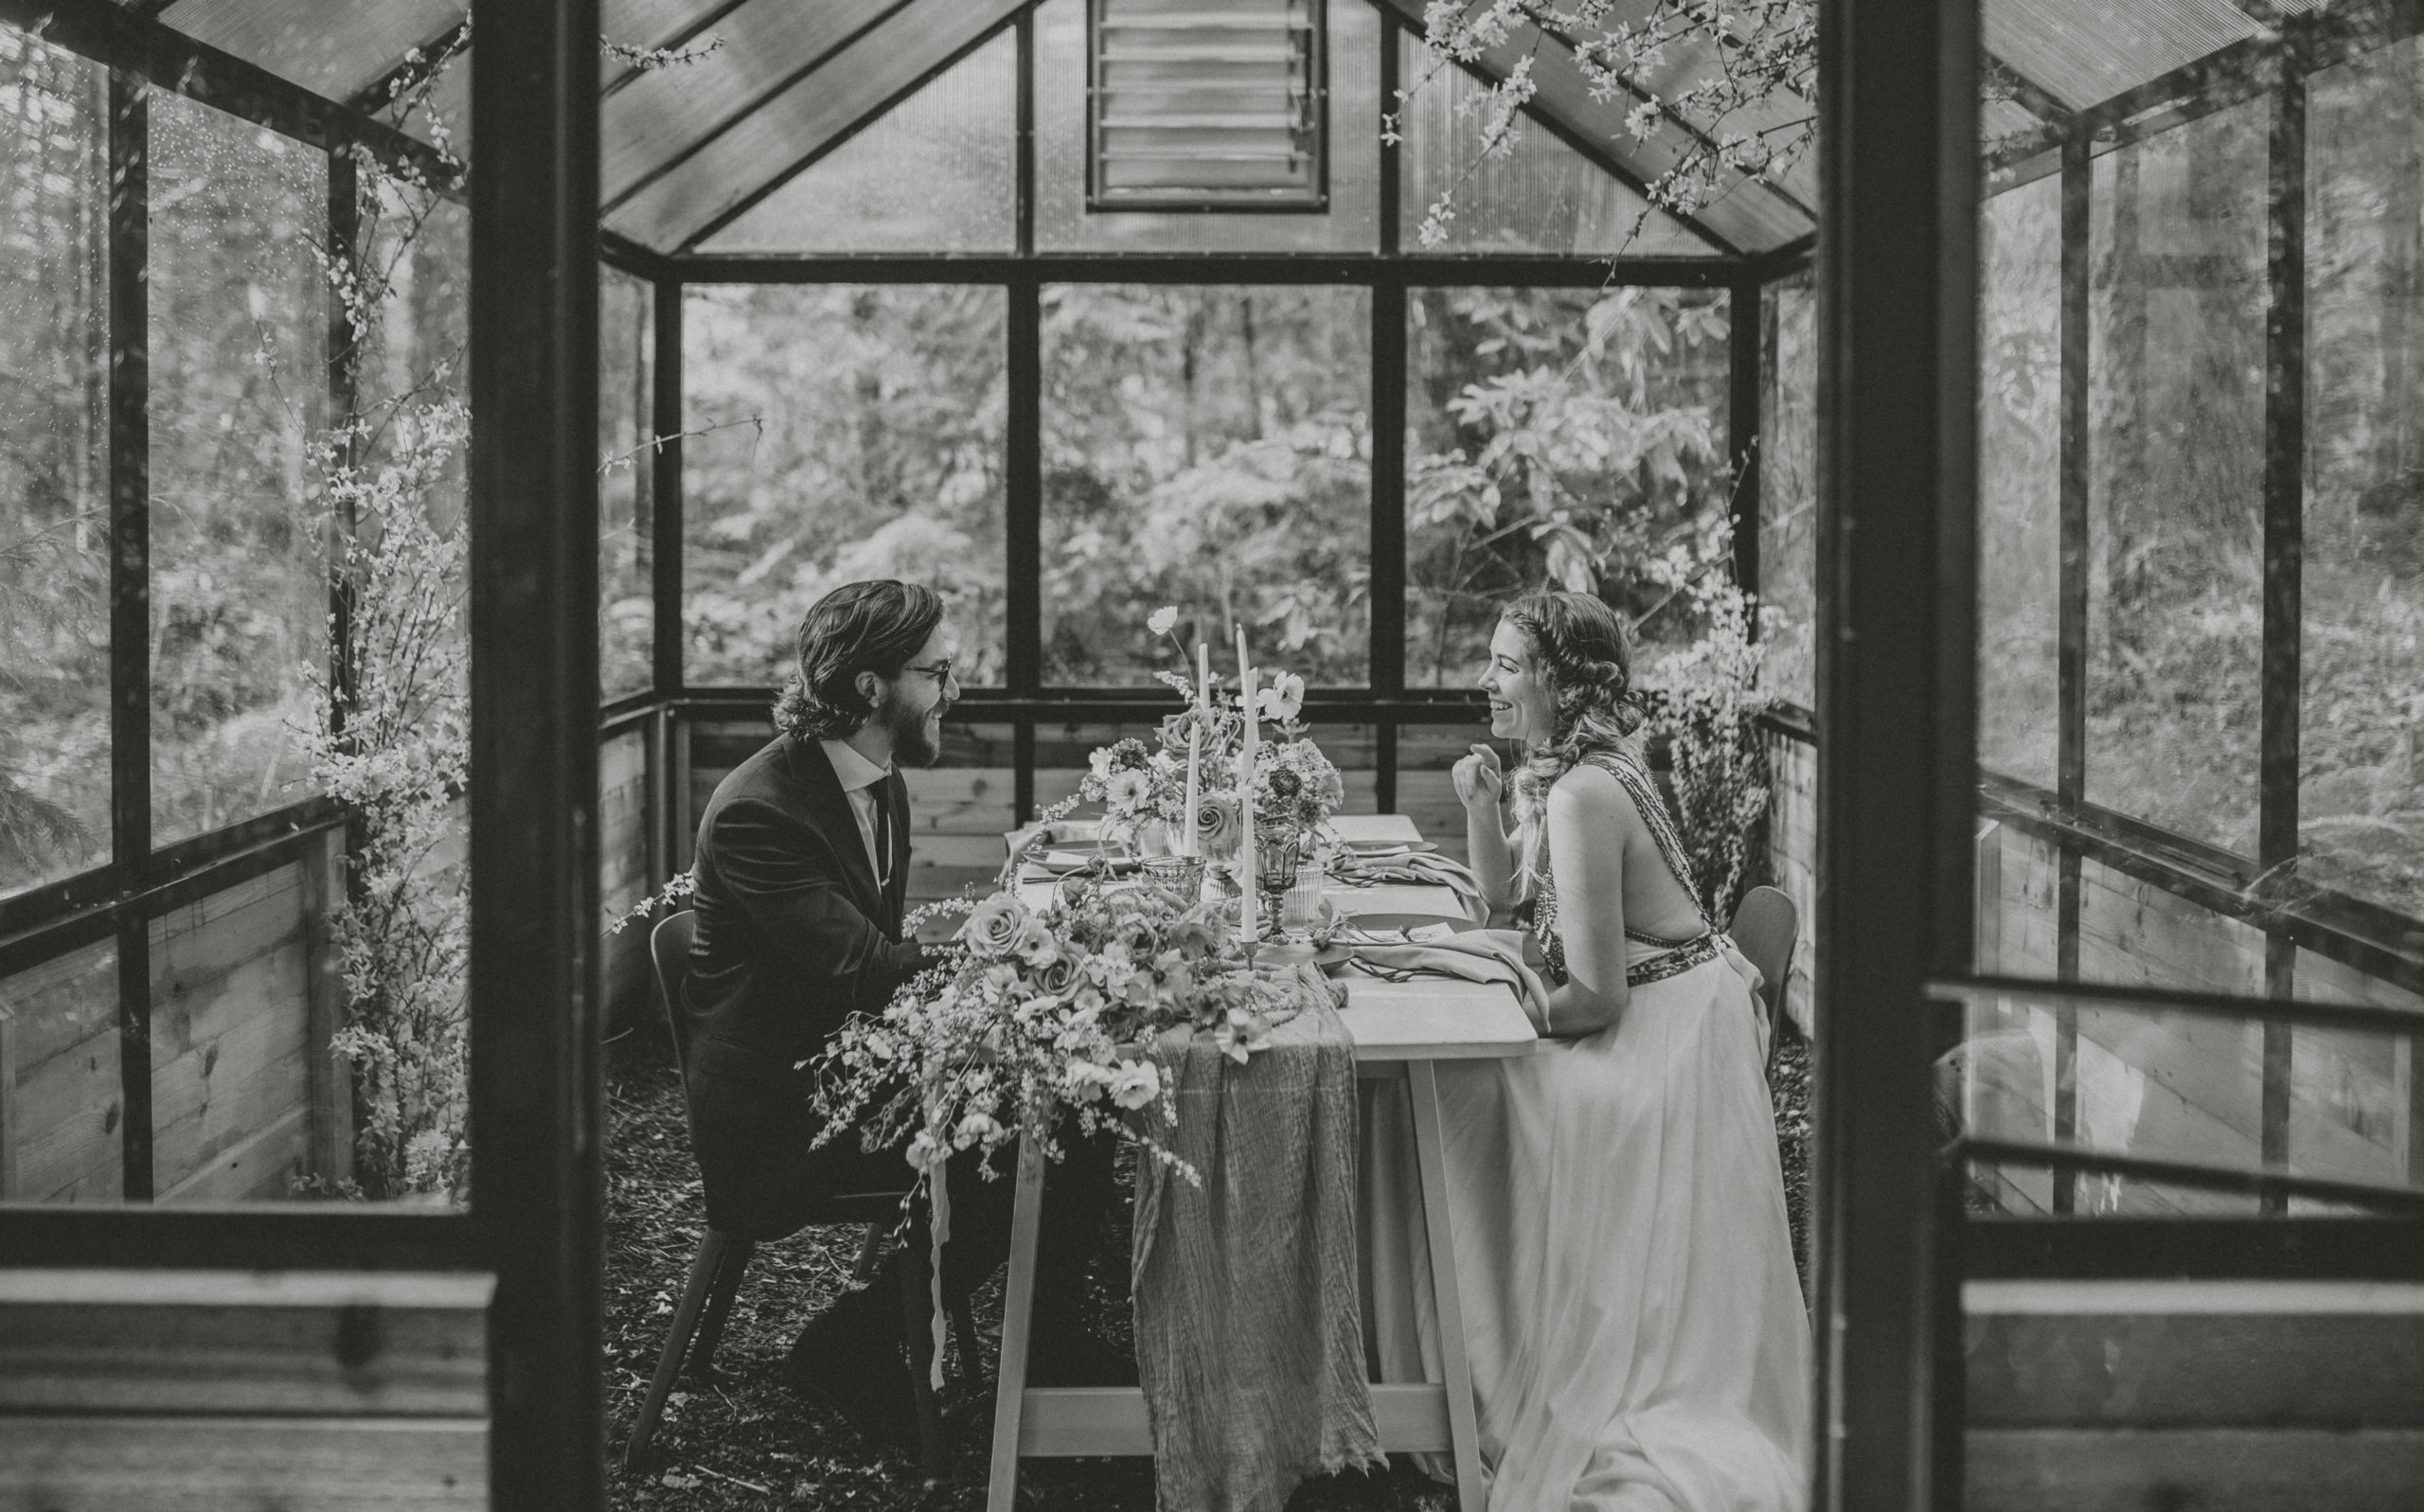 Bride and groom at dinner table